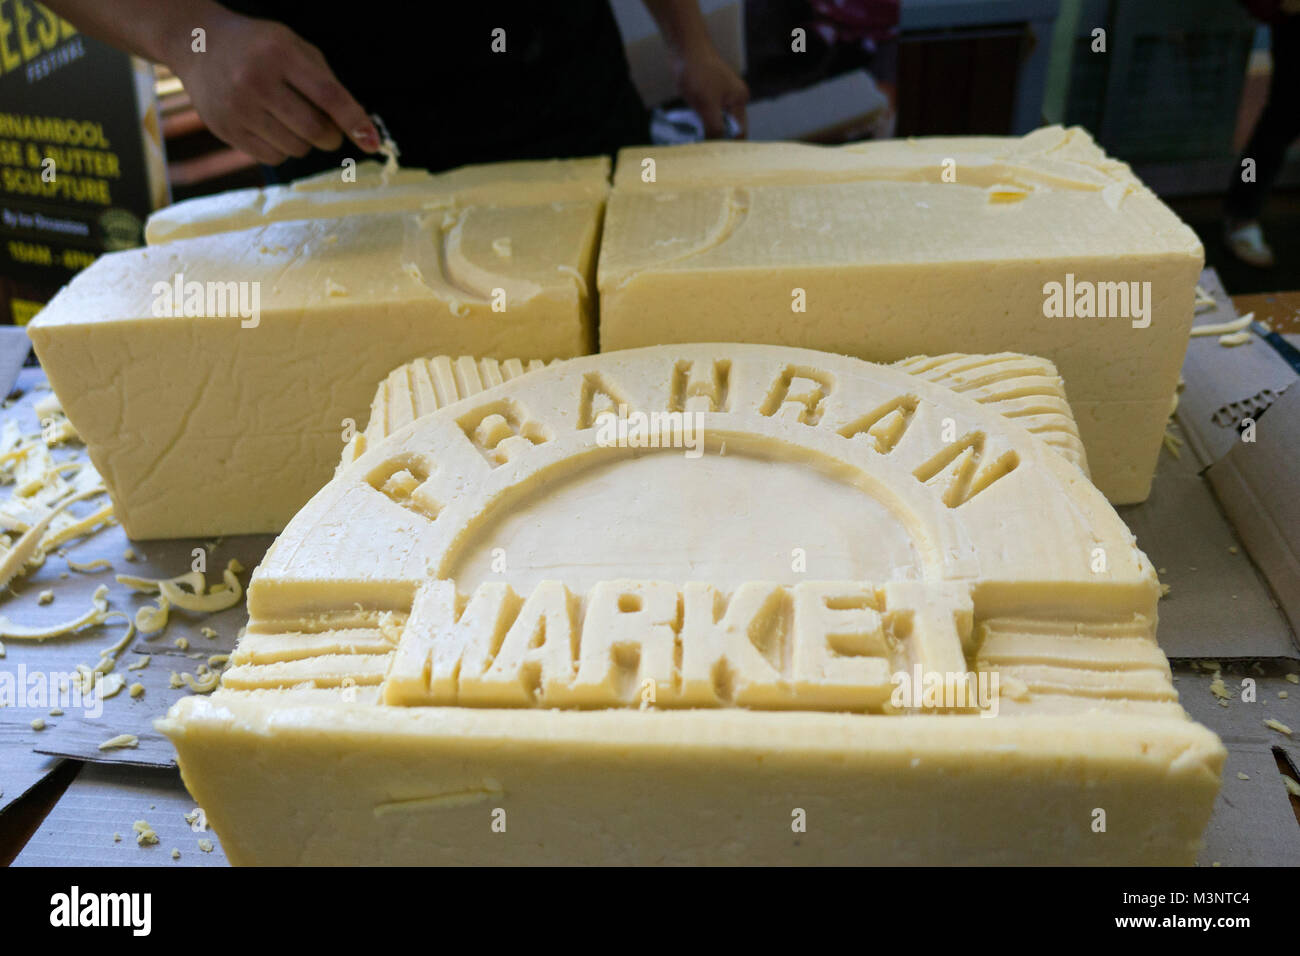 Say Cheese Festival cheese carving Market Melbourne Australia Stock Photo